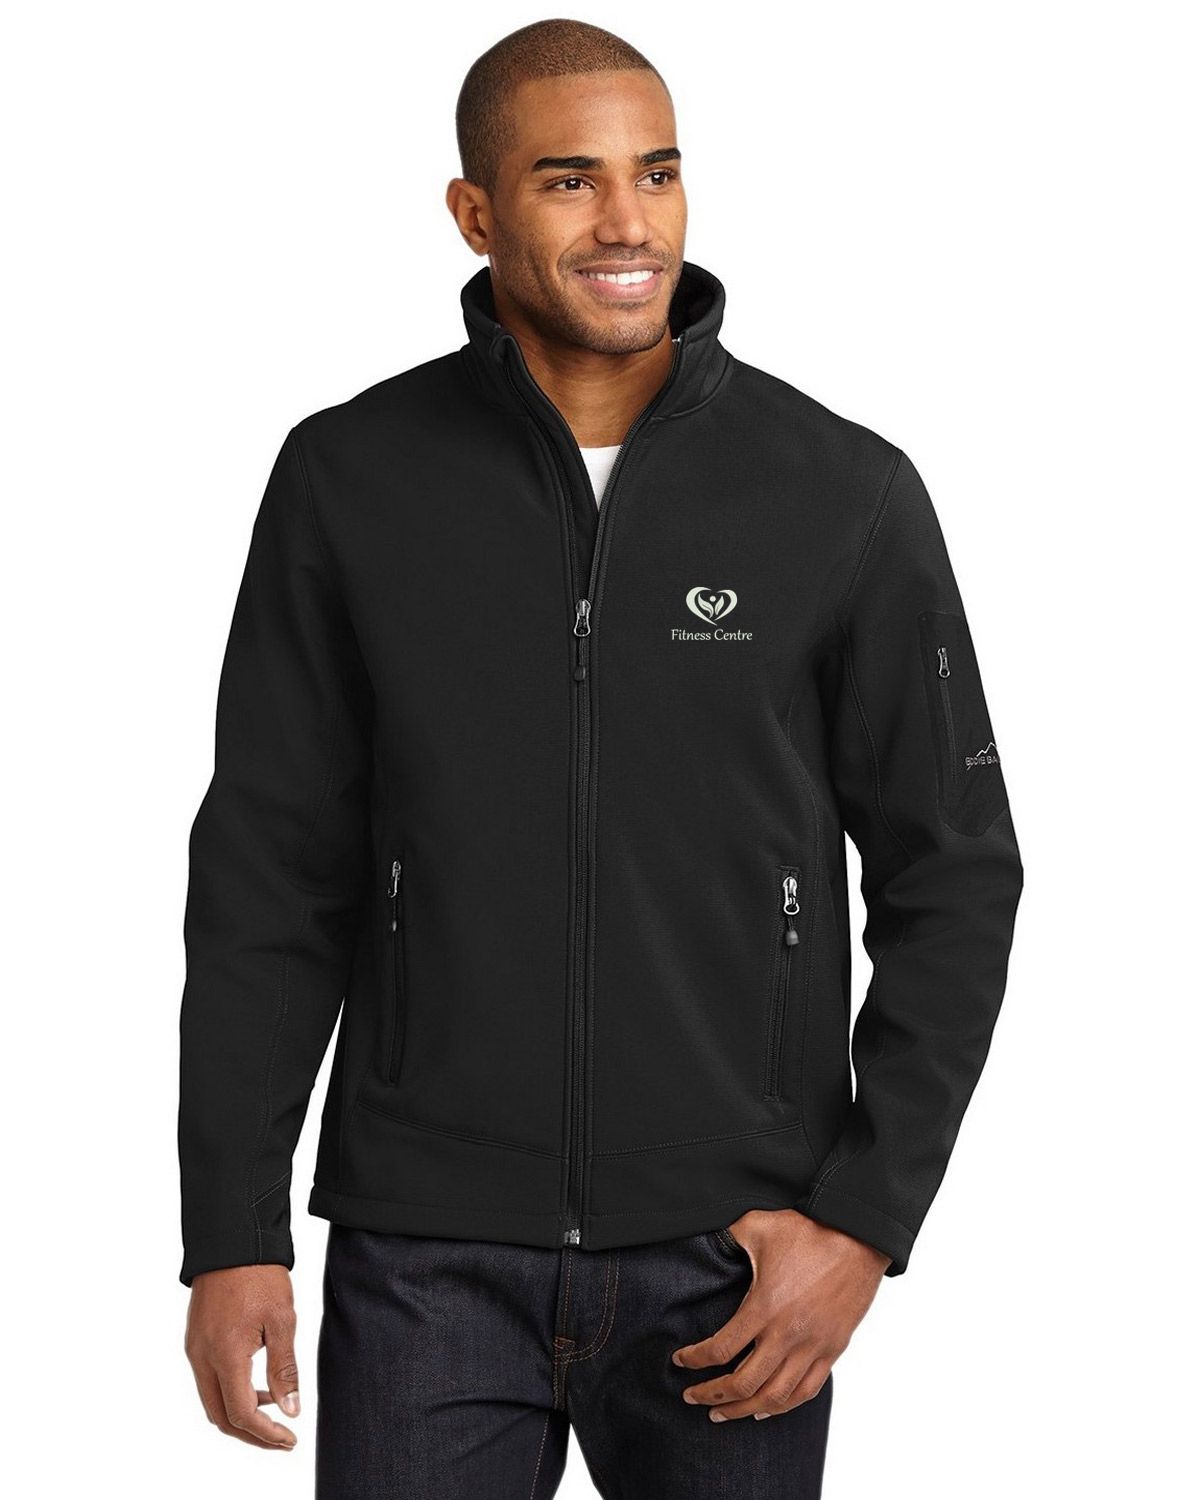 Eddie Bauer Logo Embroidered Soft Shell Jacket at ApparelnBags.com